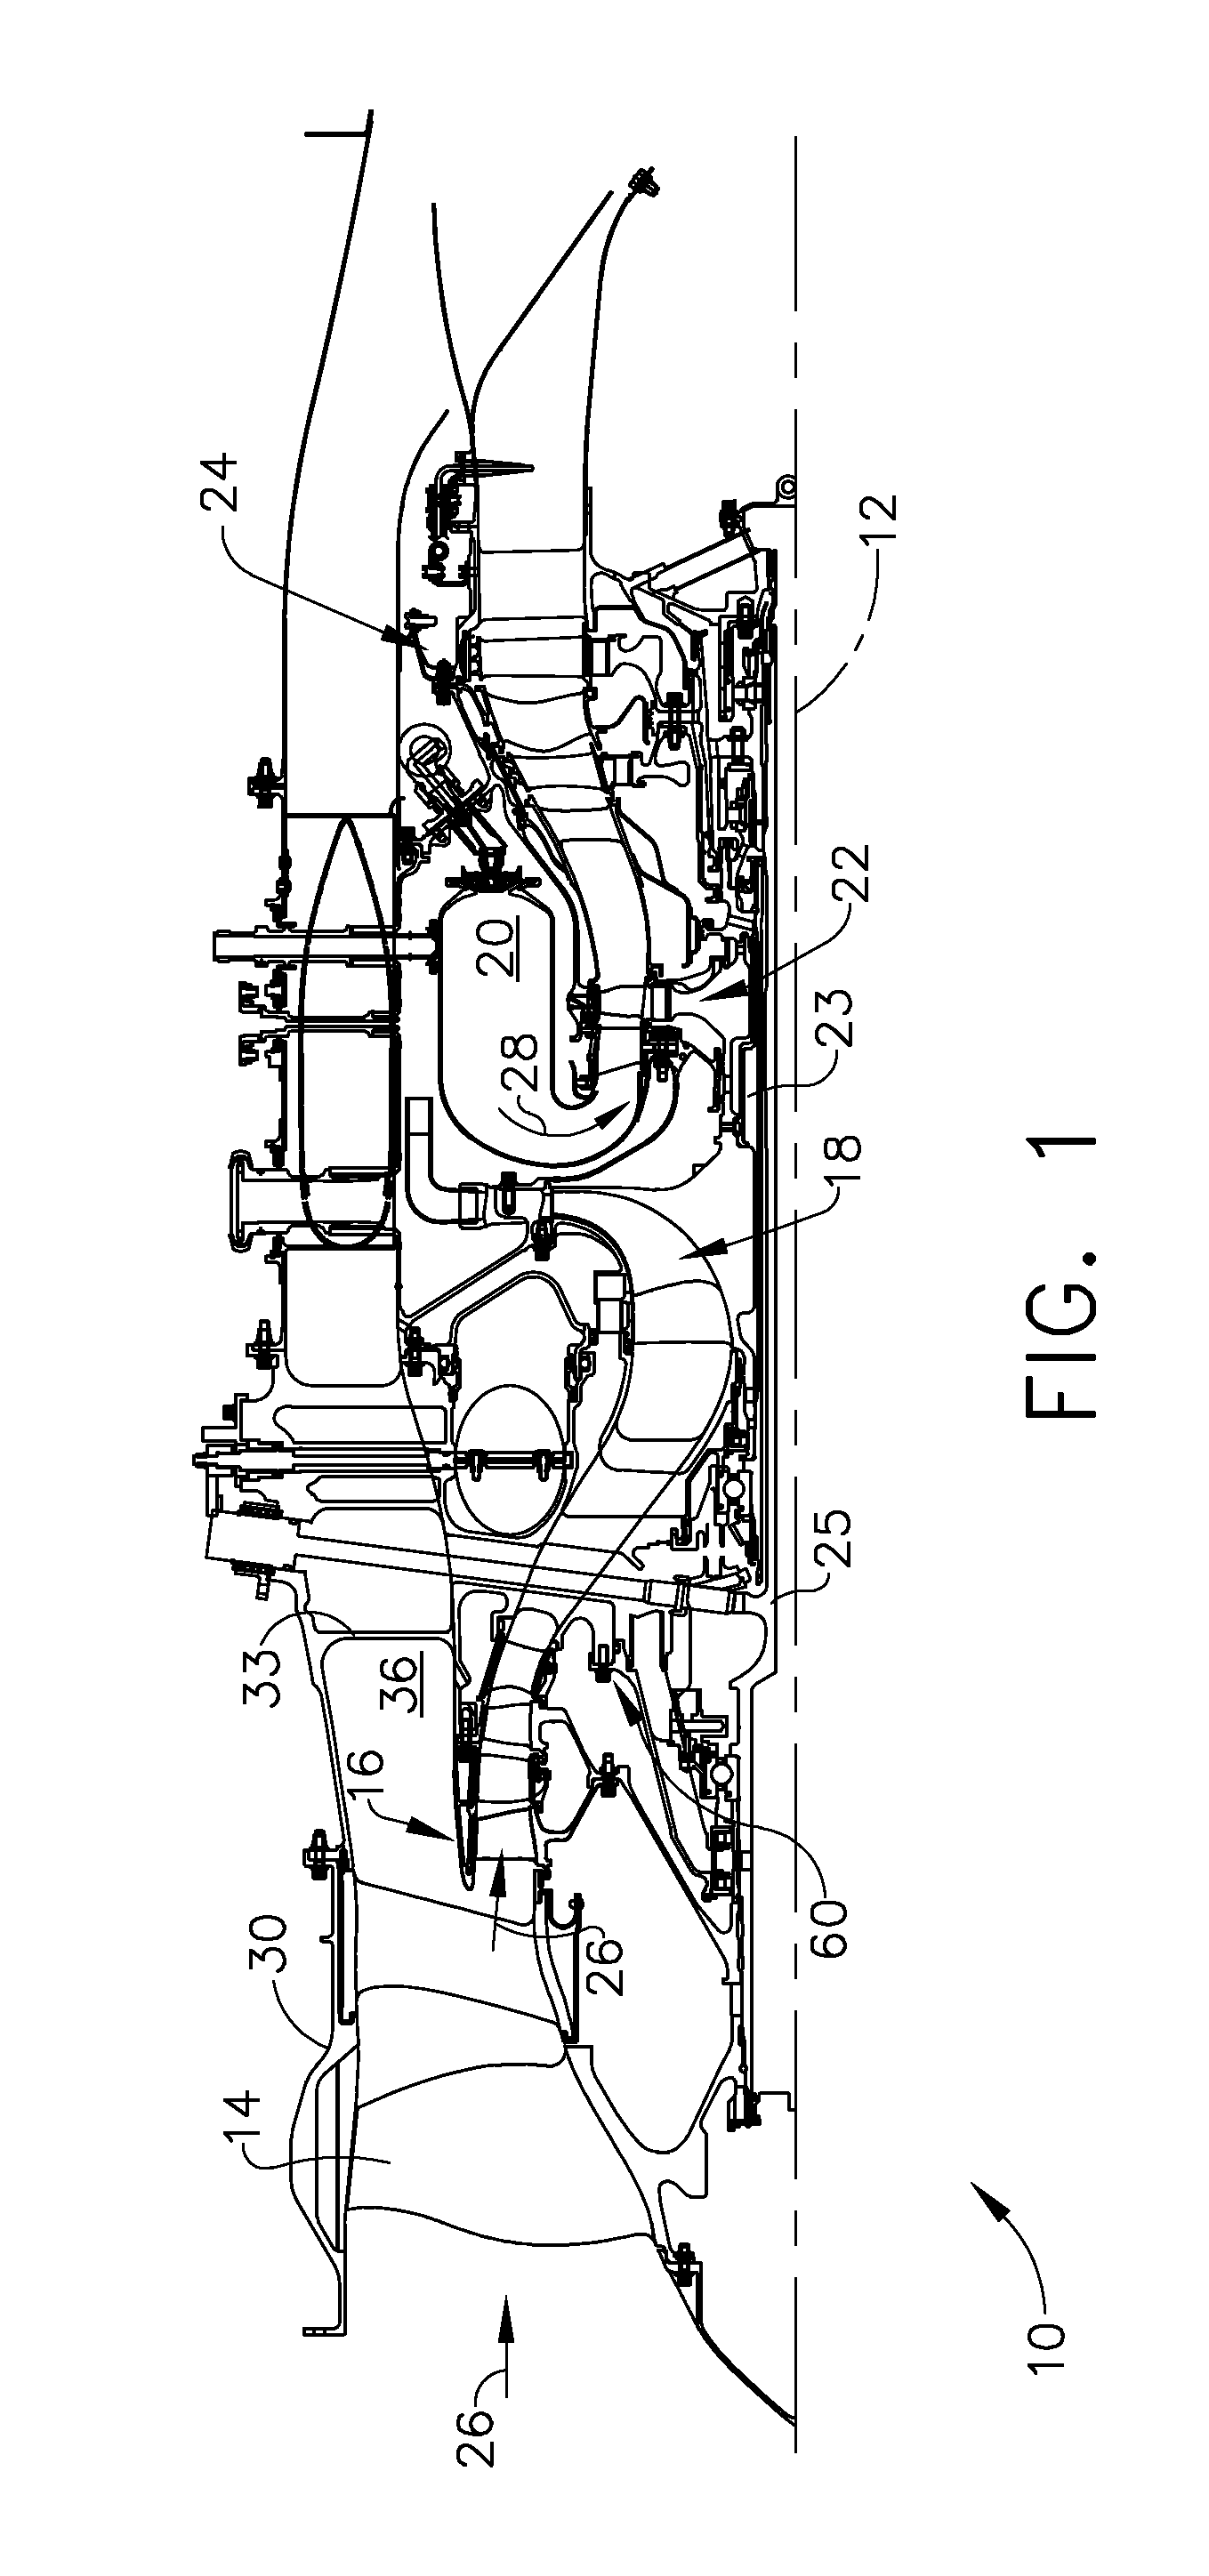 Dynamic load reduction system